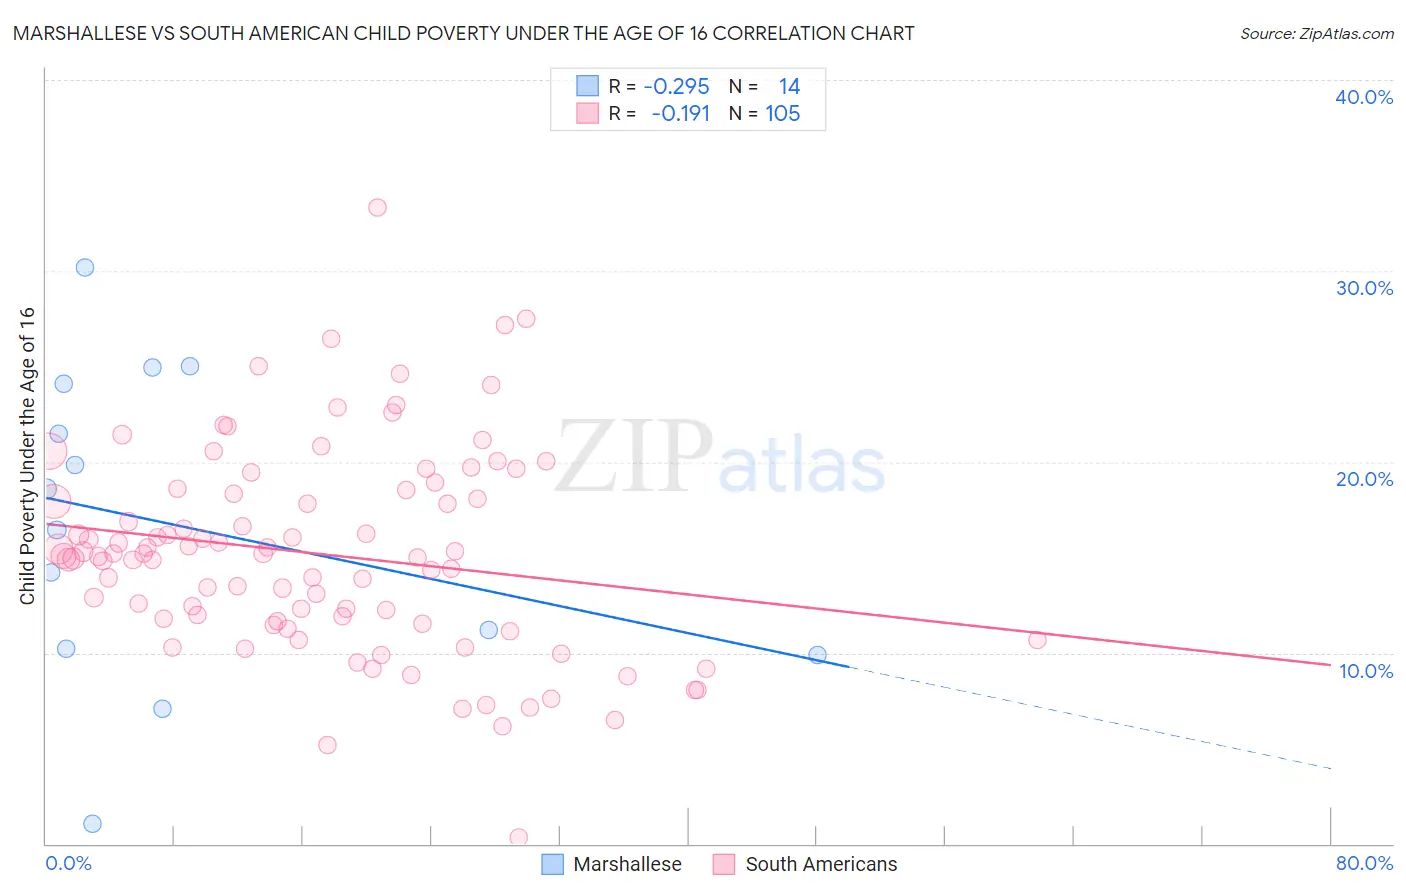 Marshallese vs South American Child Poverty Under the Age of 16